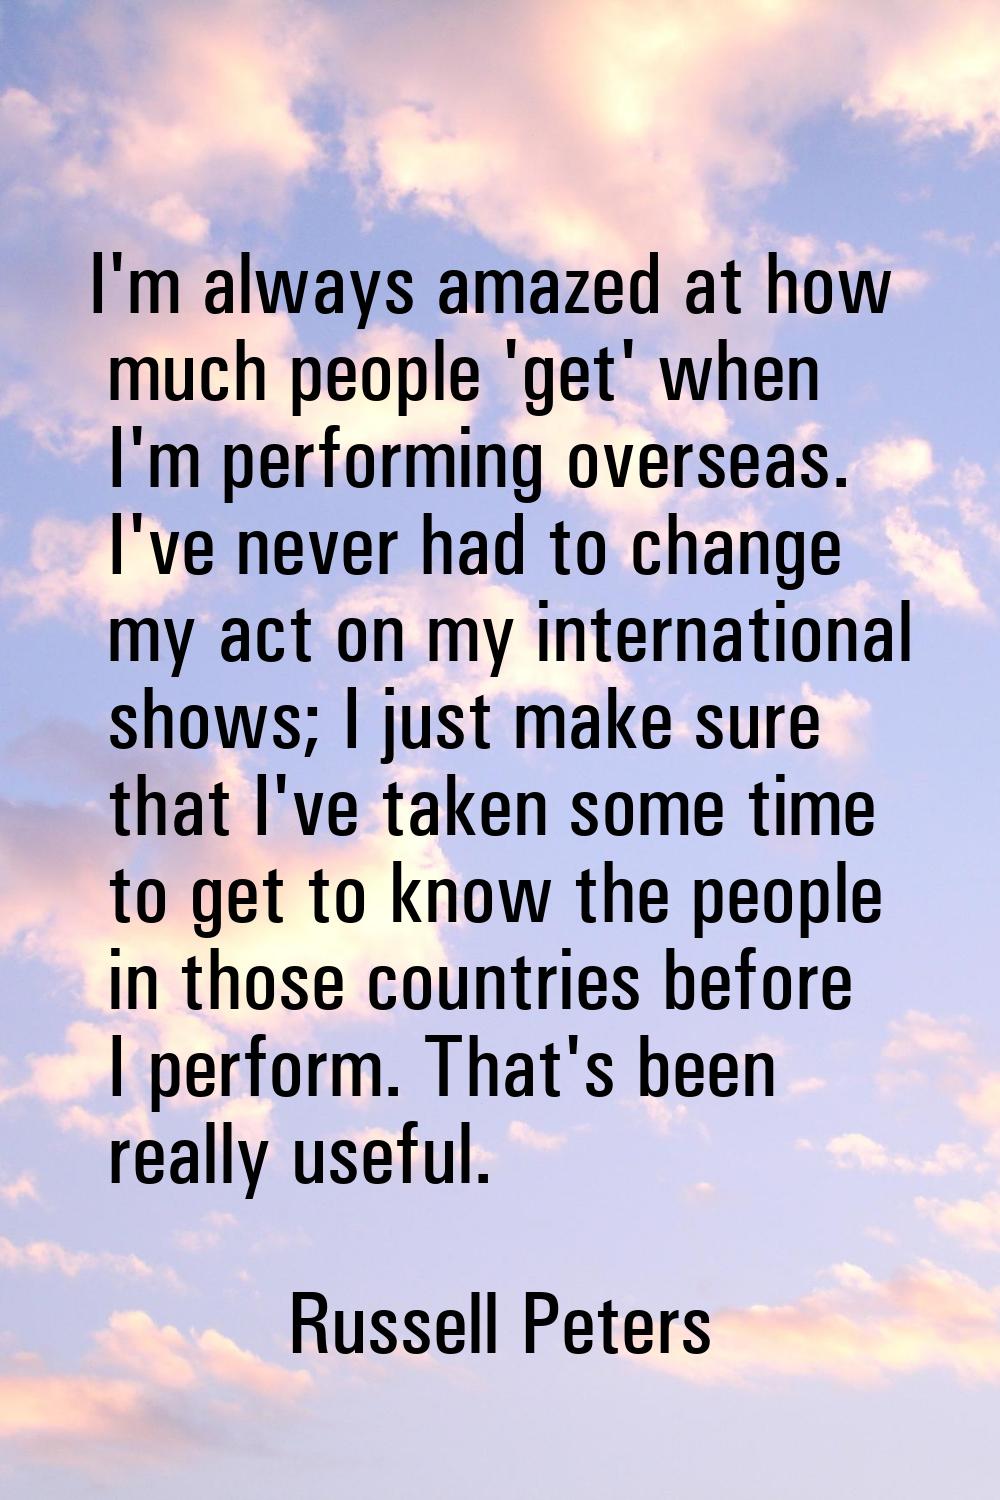 I'm always amazed at how much people 'get' when I'm performing overseas. I've never had to change m